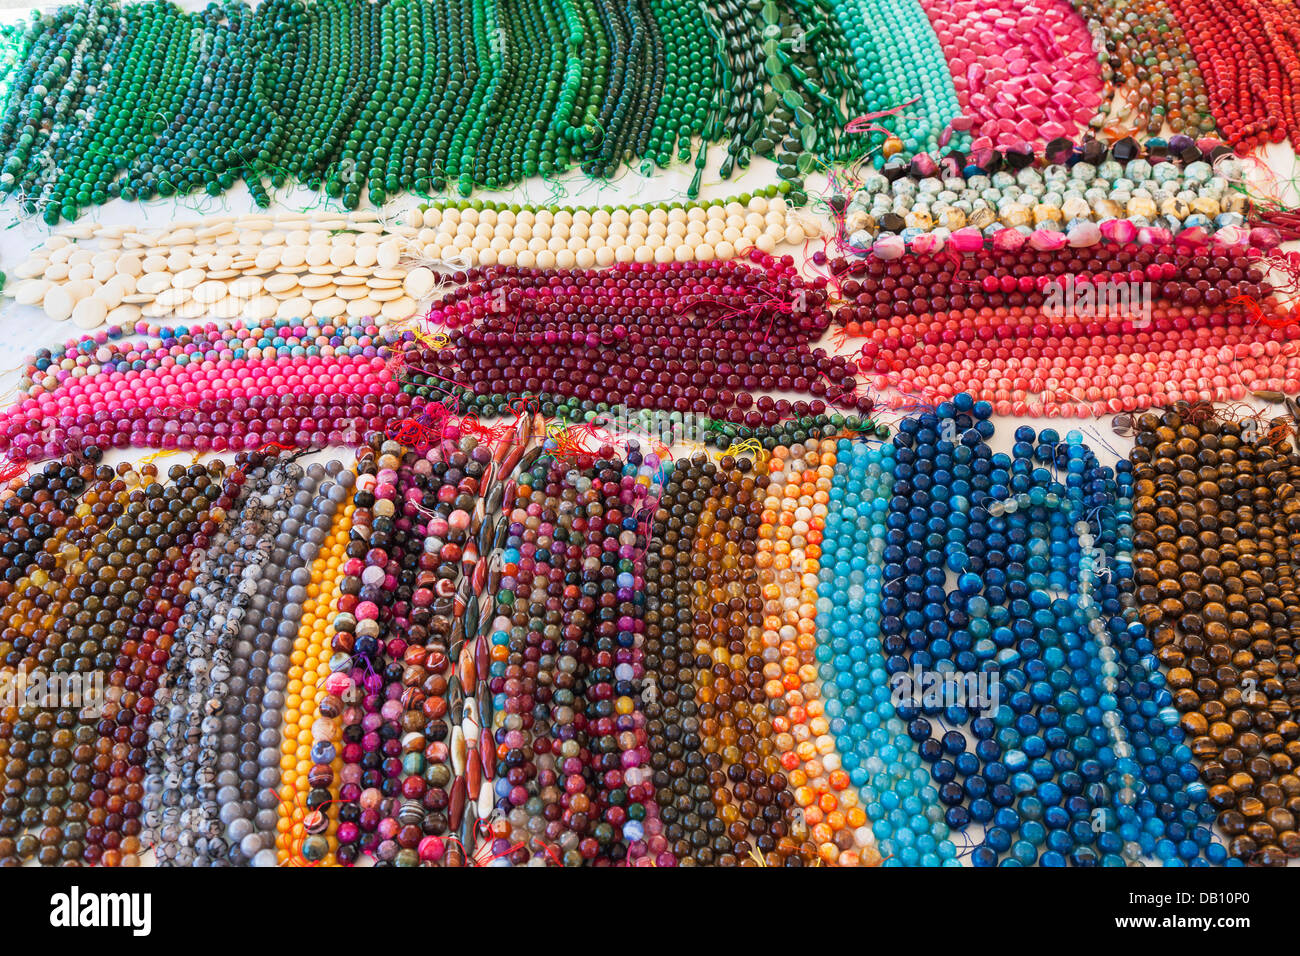 Colorful craft jewels and straw hats on sale. Hanging plastic and glass  souvenir necklaces at local market. Otranto, Italy. Stock Photo